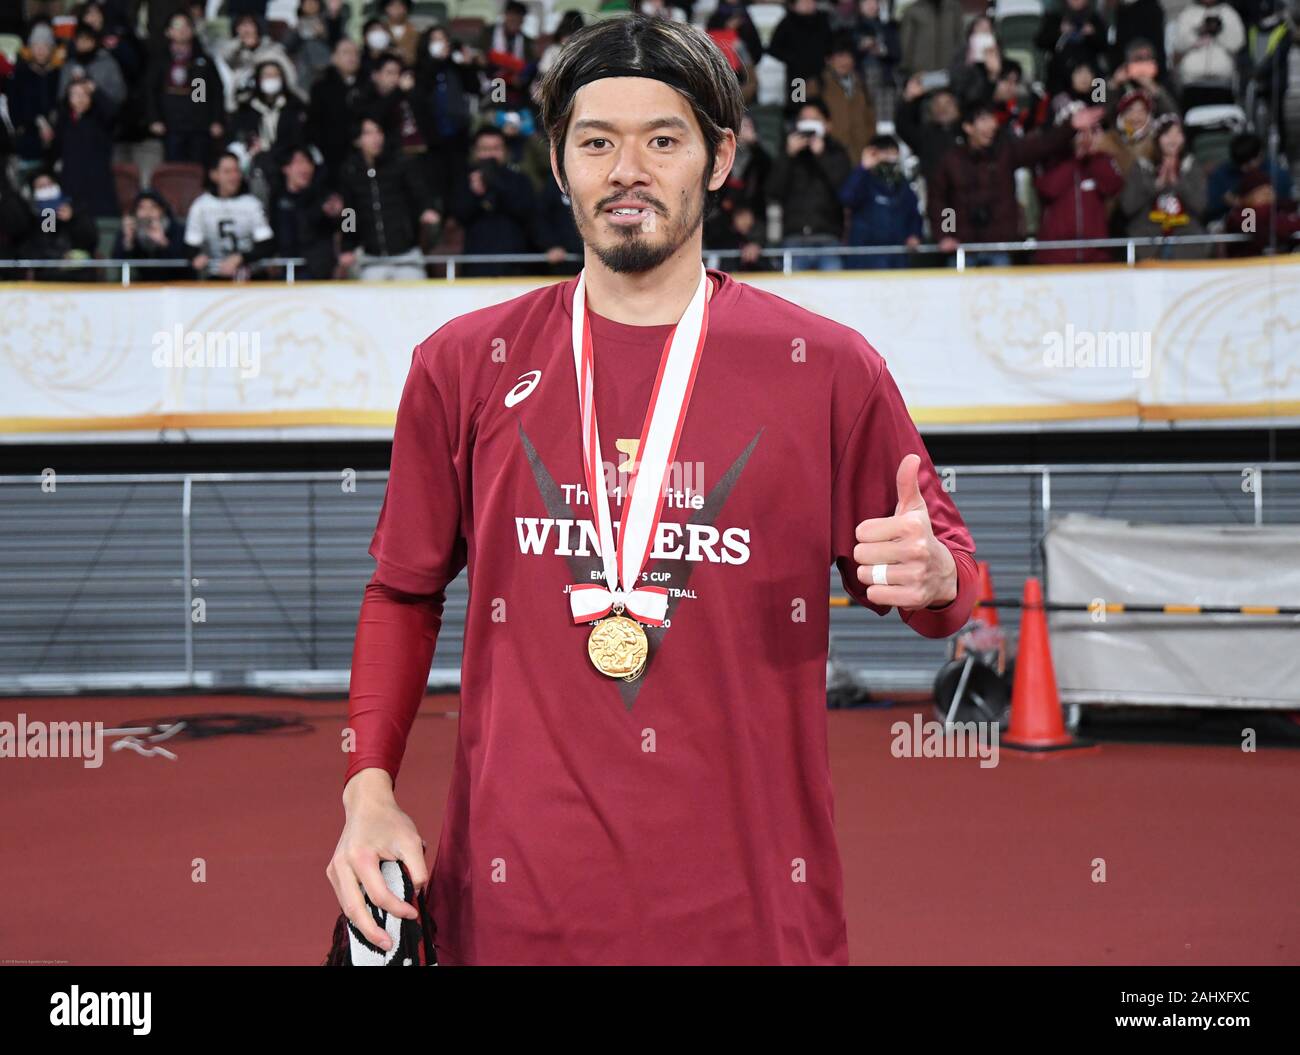 Tokyo, Japan. 1st Jan, 2020. Yamaguchi Hotaru of Vissel team pose for a photo during a moment of celebration. Vissel Kobe football team premieres at Tokyo National Stadium in Japan, becoming the first ever Vissel Kobe team to win an Emperor's Cup JFA championship. The game was held at the stadium that will serve as the main venue of the Tokyo 2020 Olympic Games. Photo taken onã€€Wednesday January 1, 2020. Photo by: Ramiro Agustin Vargas Tabares Credit: Ramiro Agustin Vargas Tabares/ZUMA Wire/Alamy Live News Stock Photo